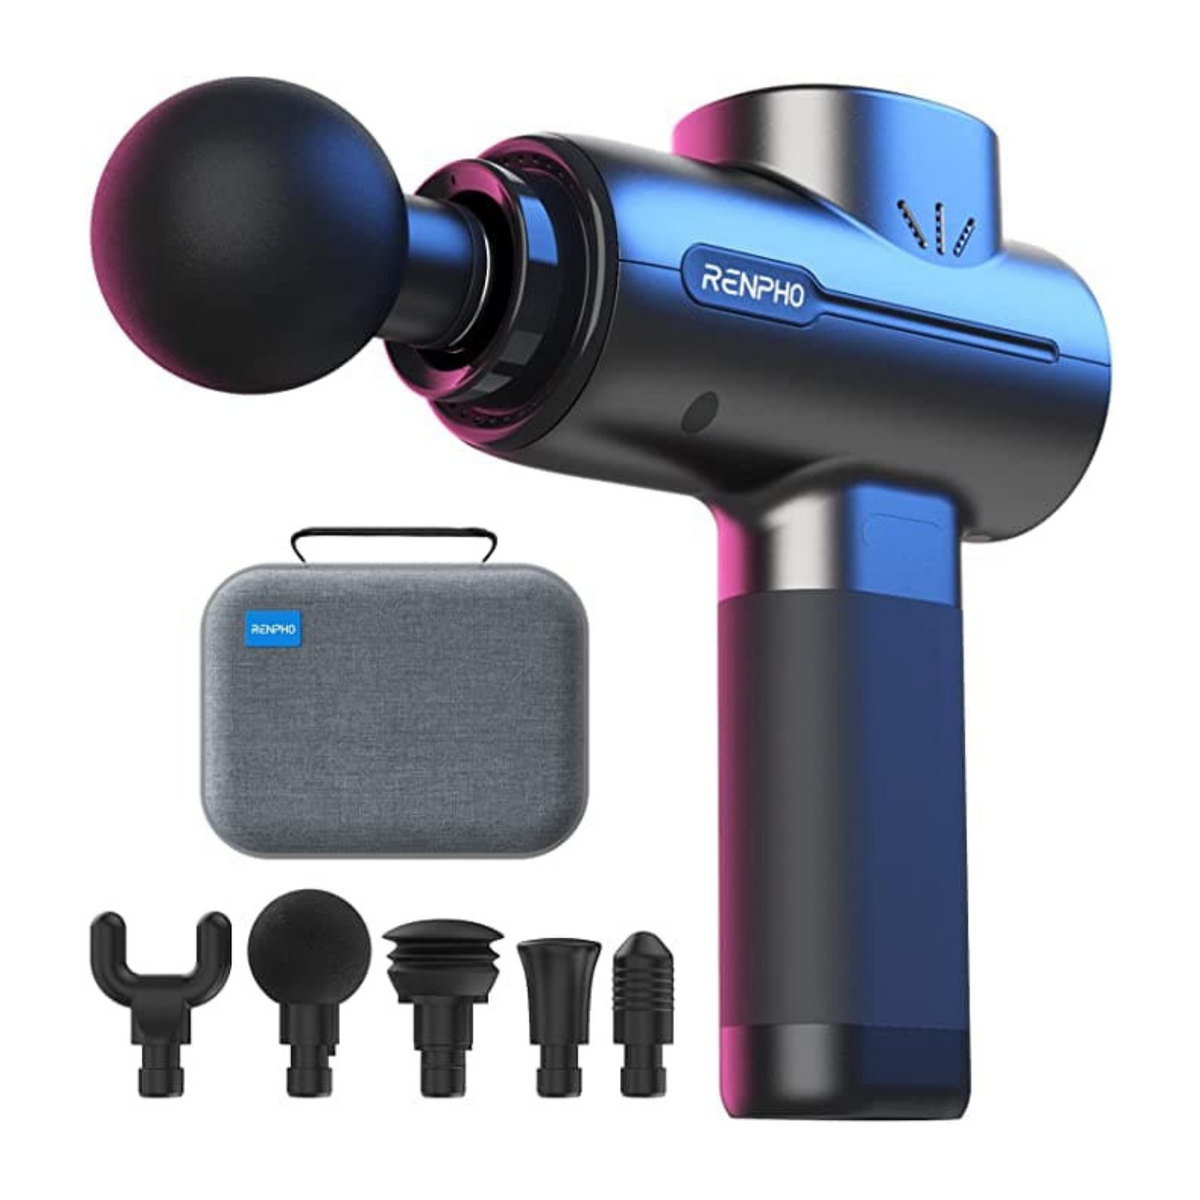 A blue and black RENPHO Active Massage Gun with various detachable heads displayed alongside a gray carrying case. The device, ideal for fitness enthusiasts, features controls on the handle and multiple intensity levels indicated on the top.